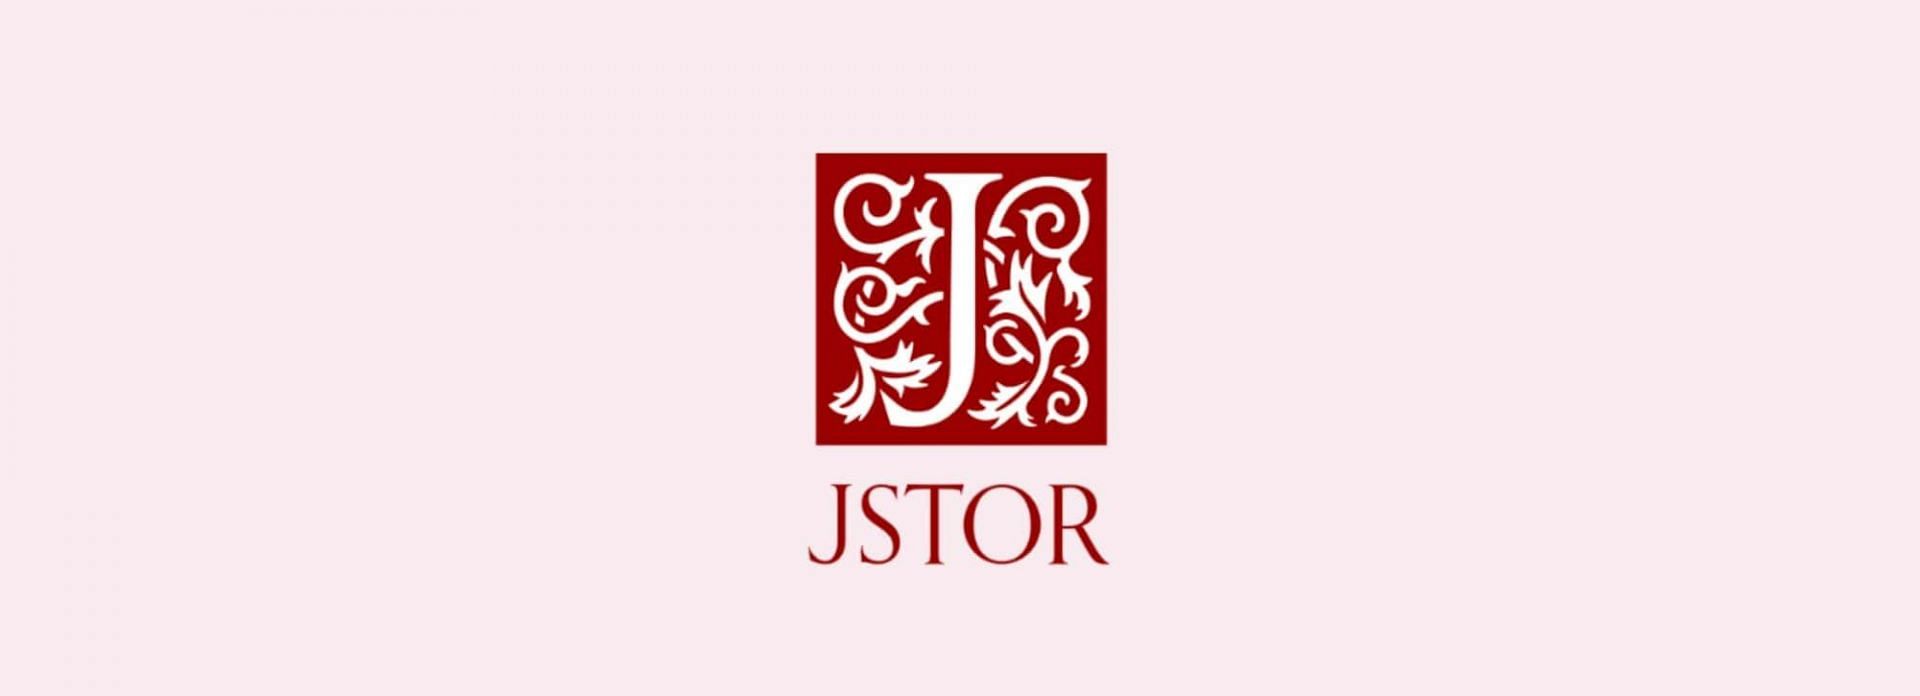 A trustable source for research (Image via JSTOR)